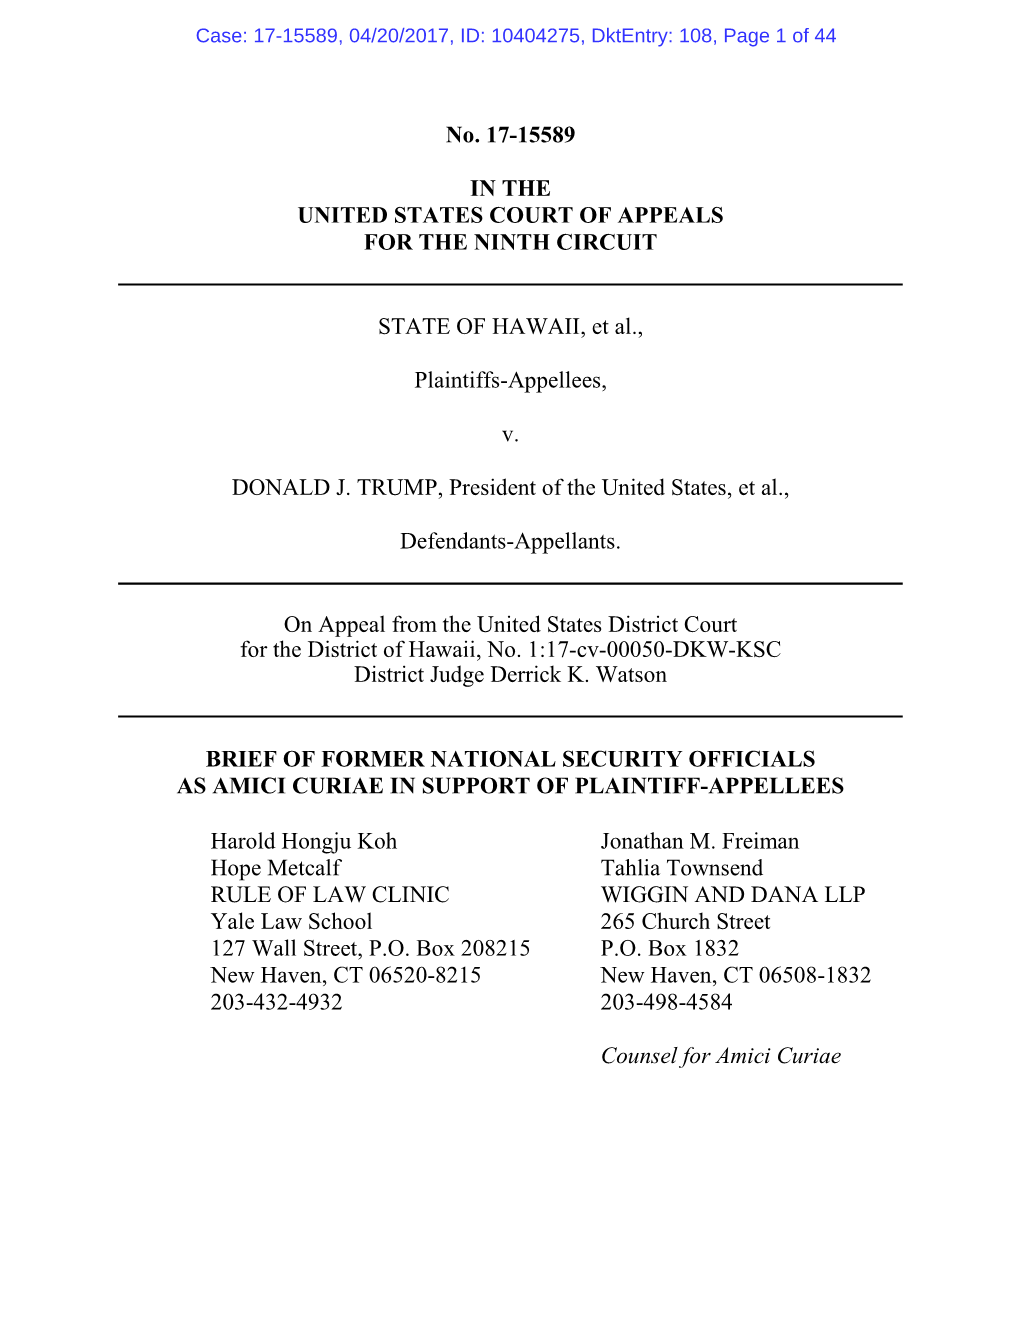 No. 17-15589 in the UNITED STATES COURT of APPEALS